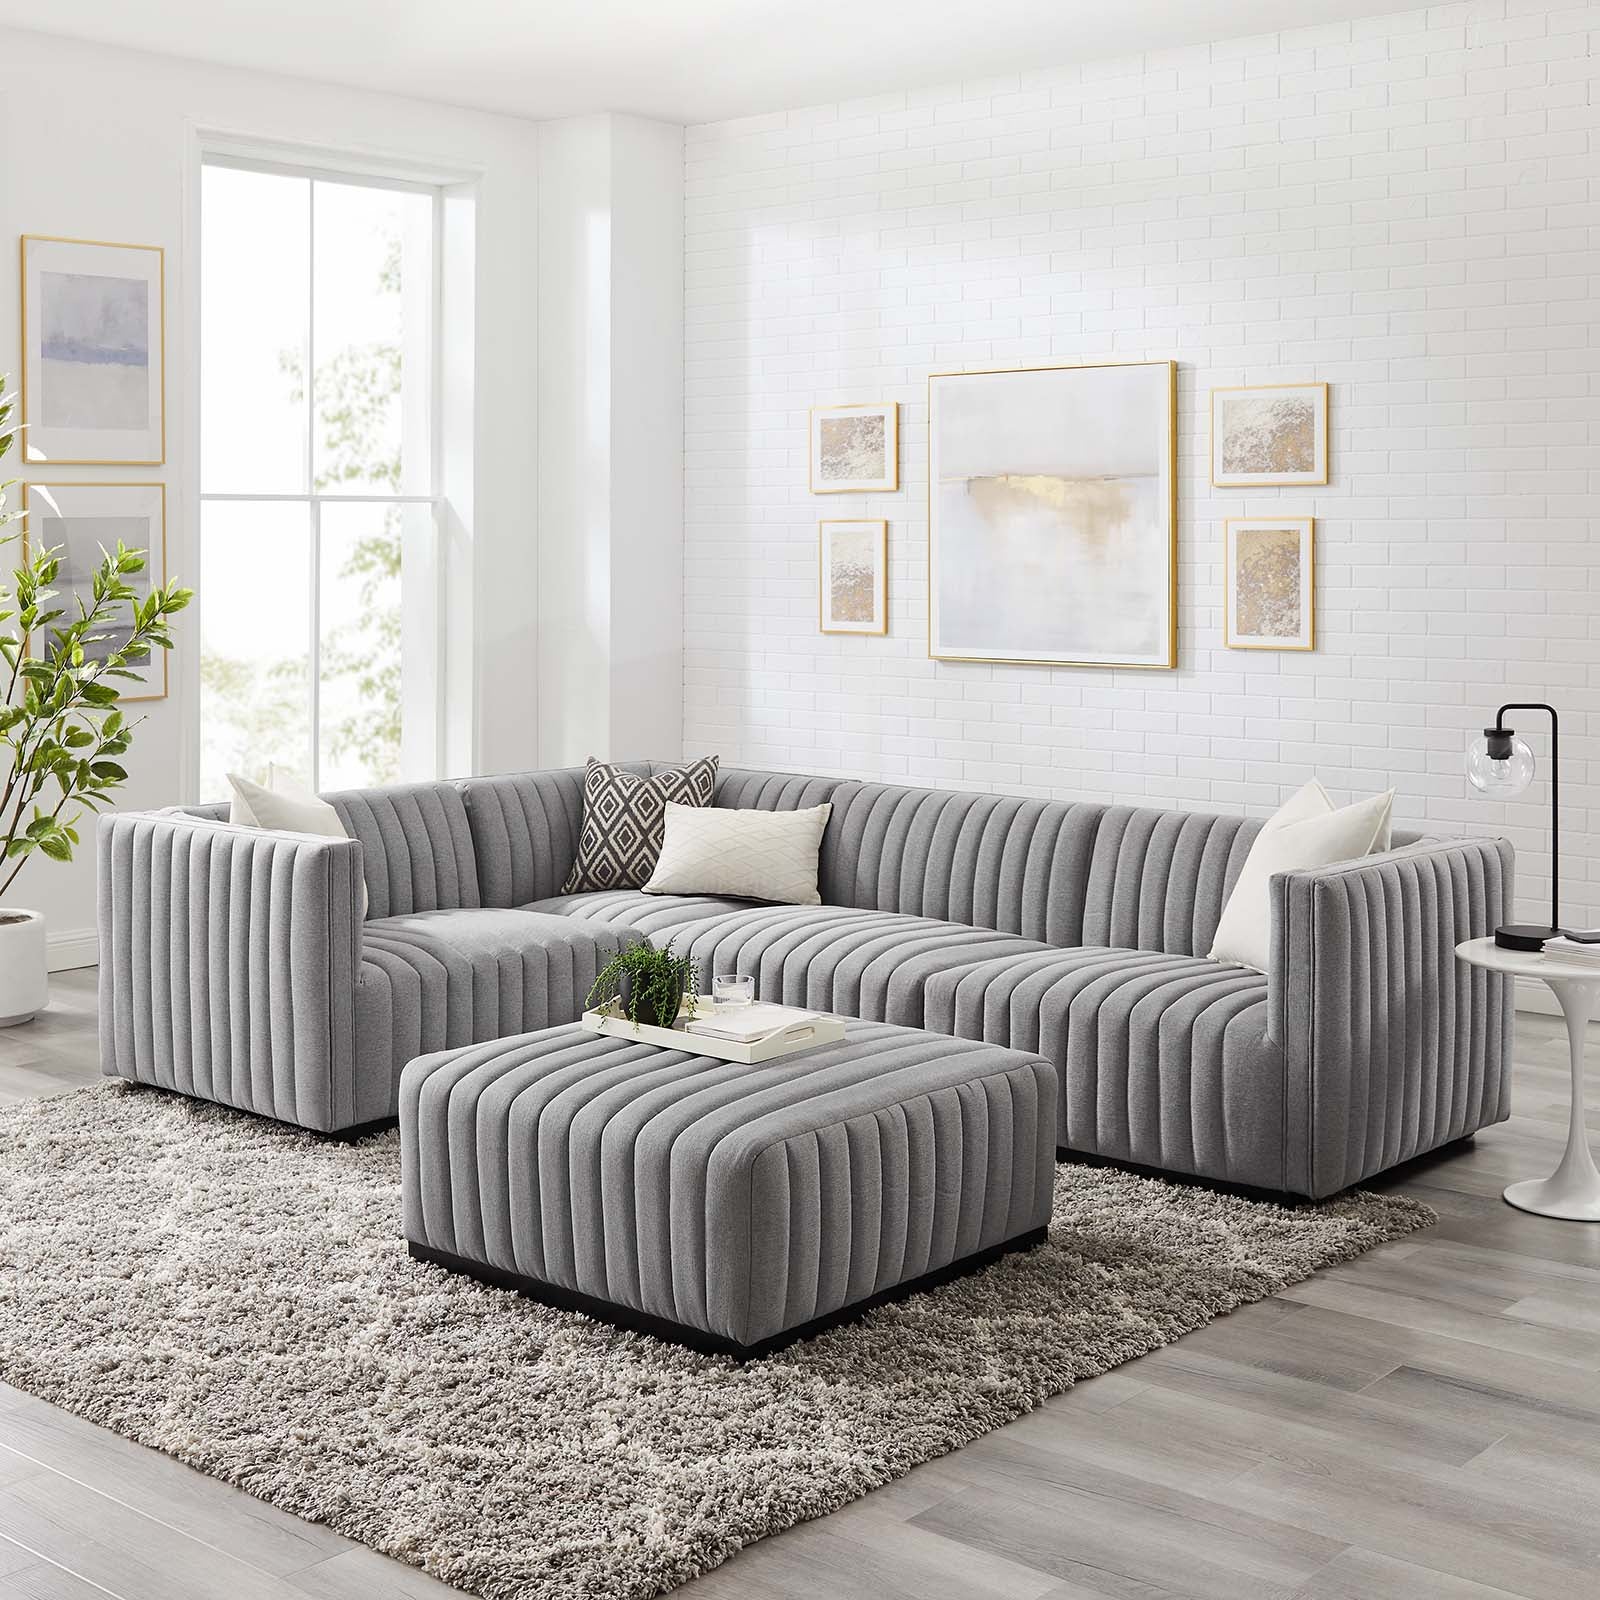 Conjure Channel Tufted Upholstered Fabric 5-Piece Sectional